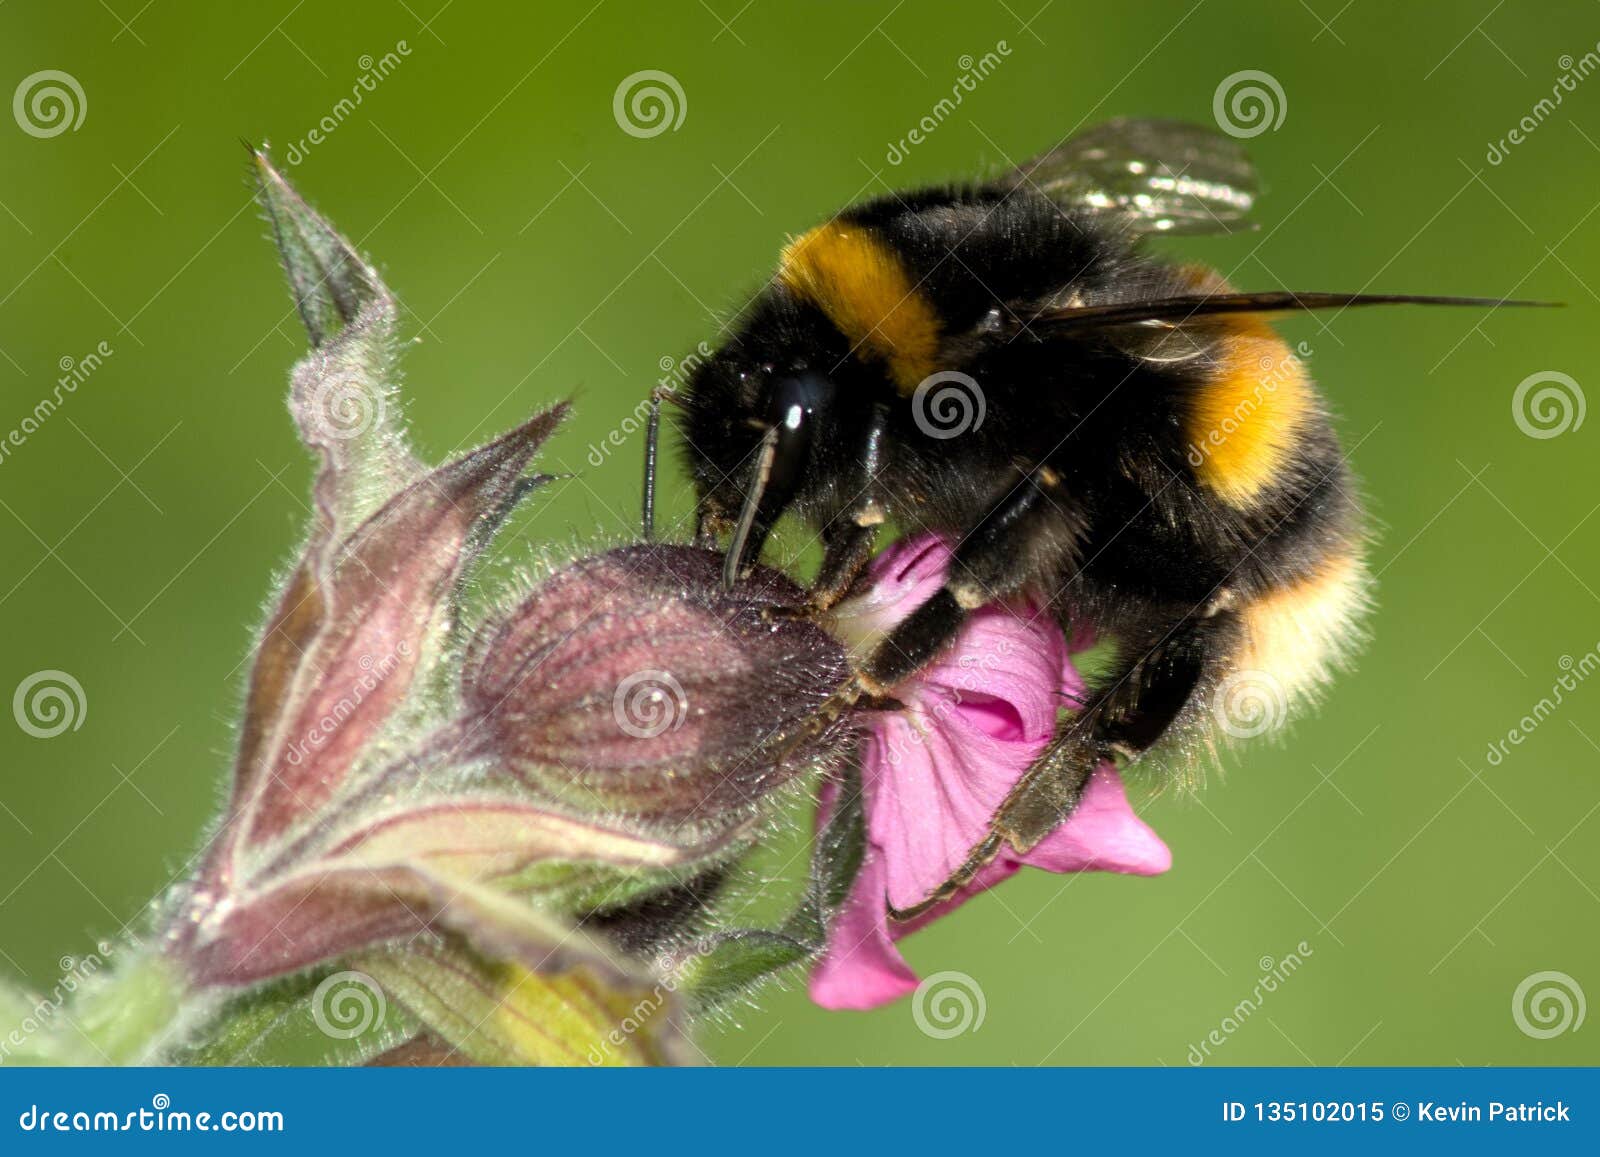 a buff tailed bumble bee - bombus terrestis on red